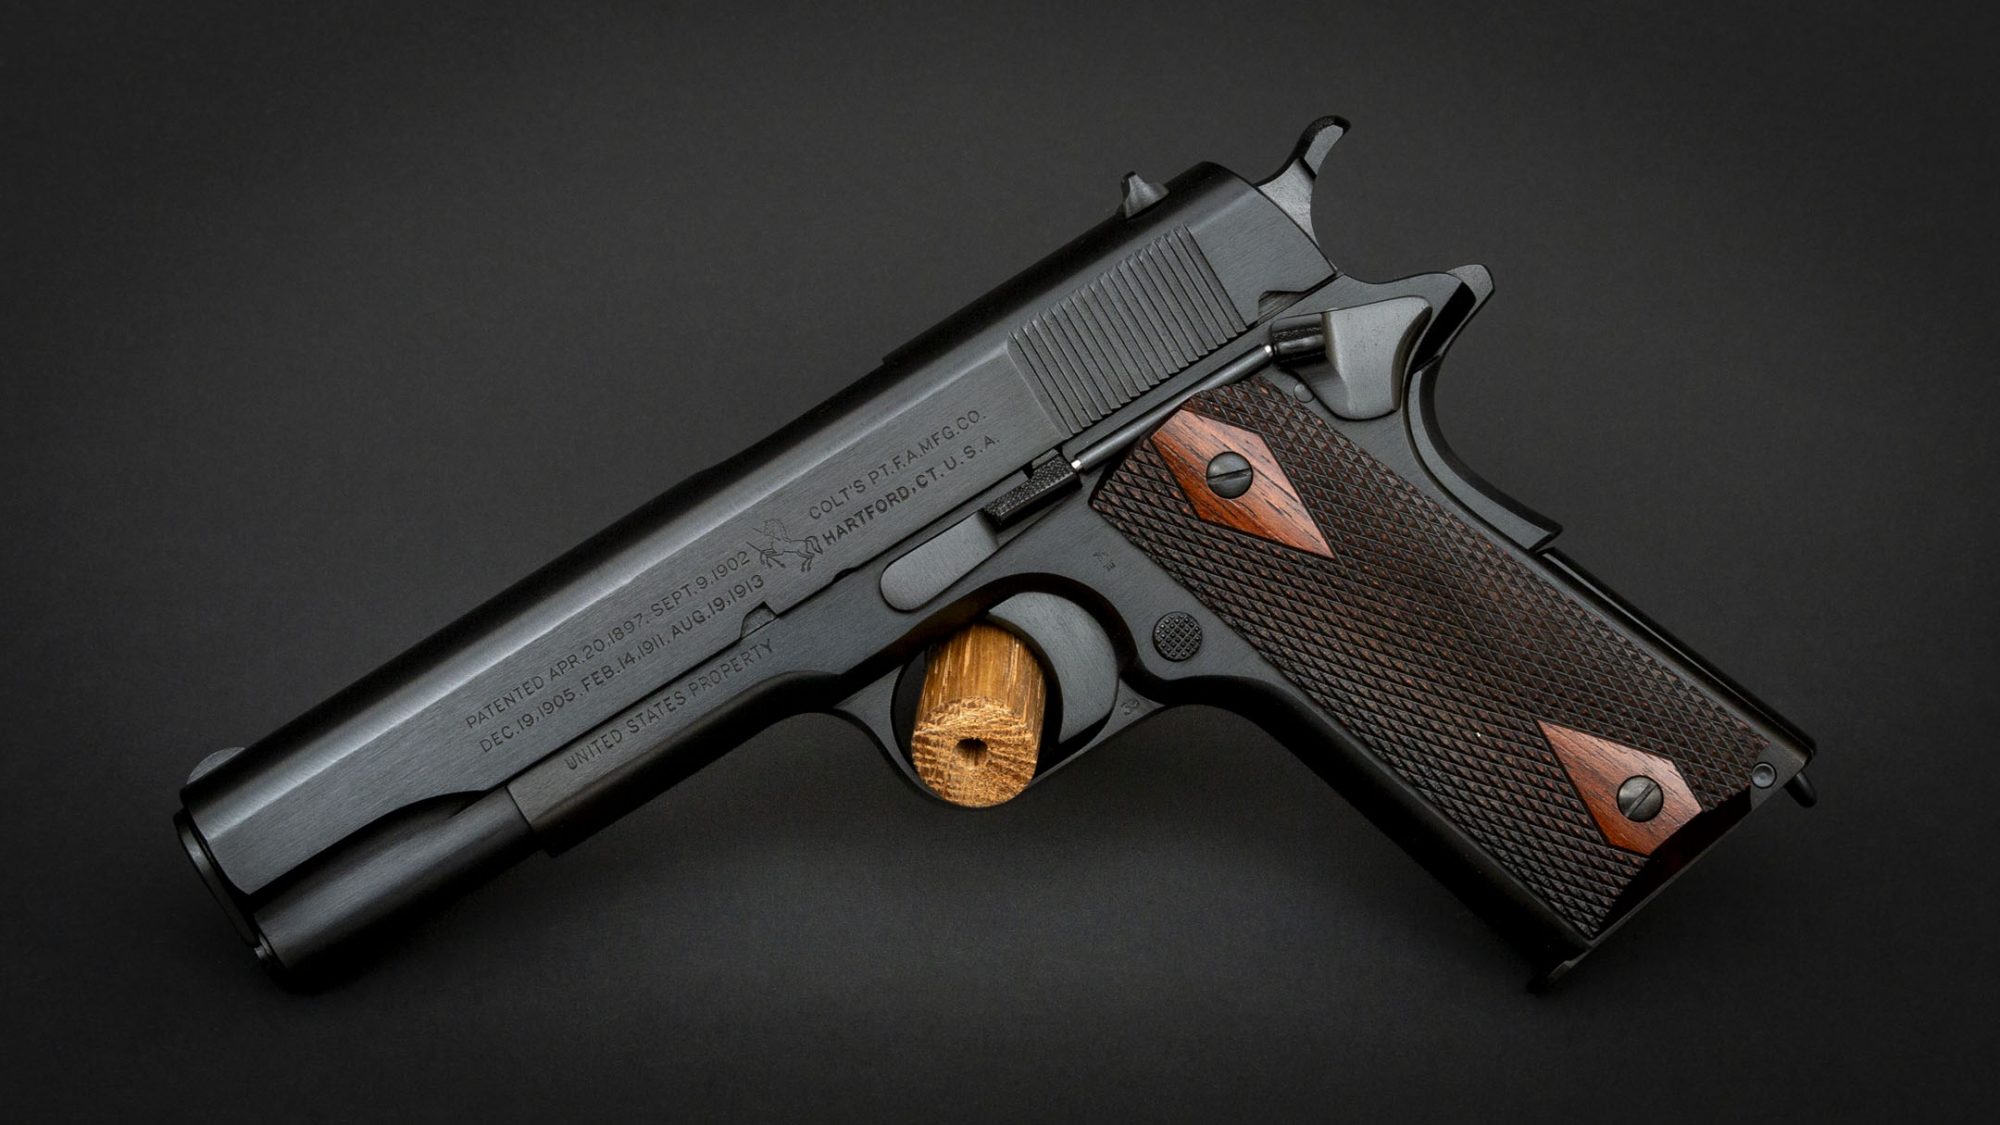 Colt Model 1911 in 1918 Black Army finish, restored by Turnbull Restoration Co. of Bloomfield, NY